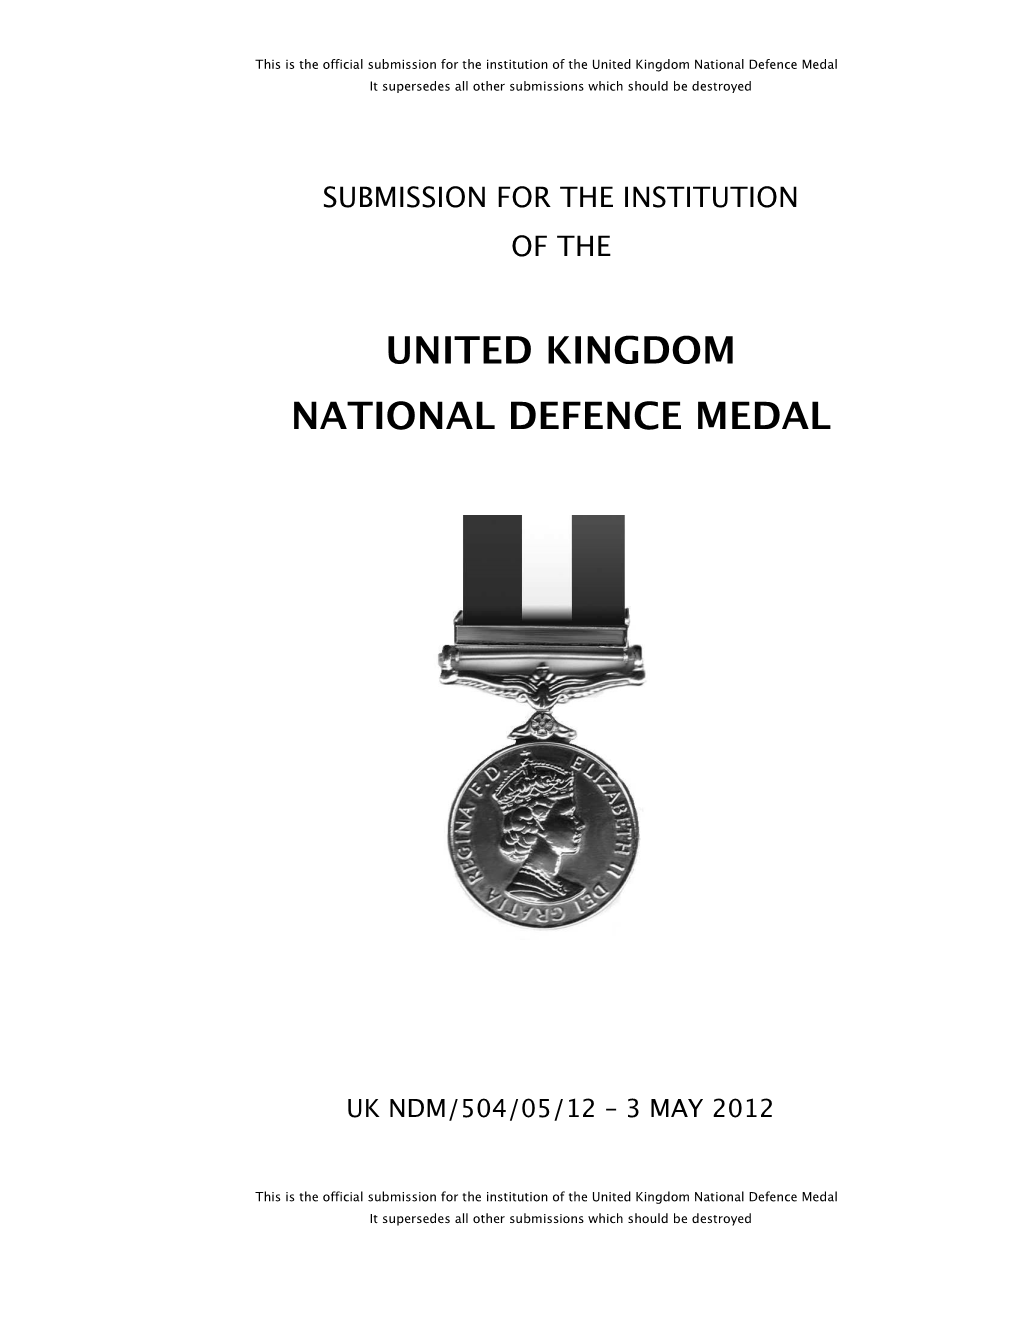 Submission for the UK National Defence Medal